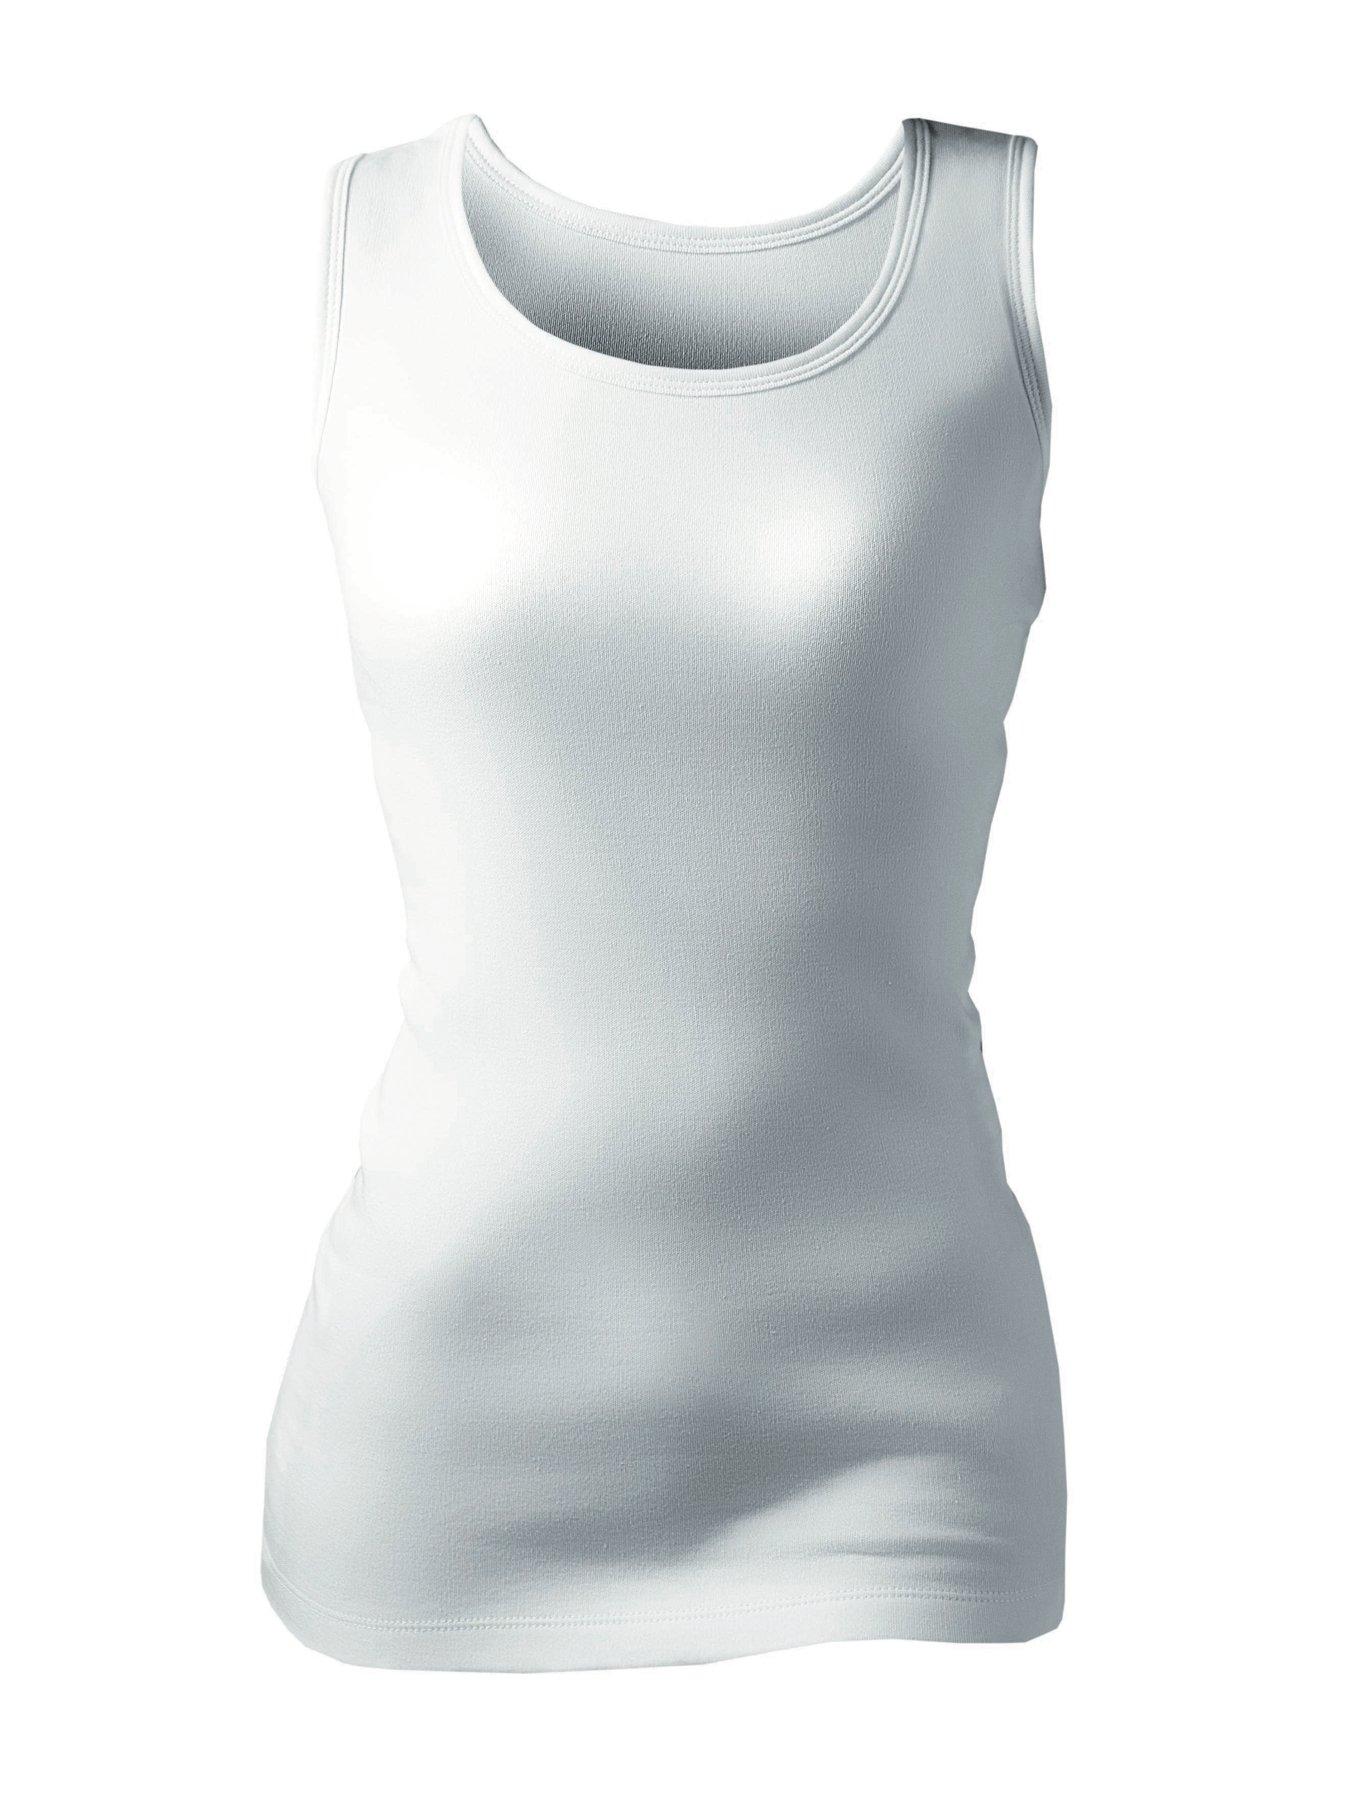 Palm® British Made Ladies/Womens Brushed Thermal Fancy Knit Camisole